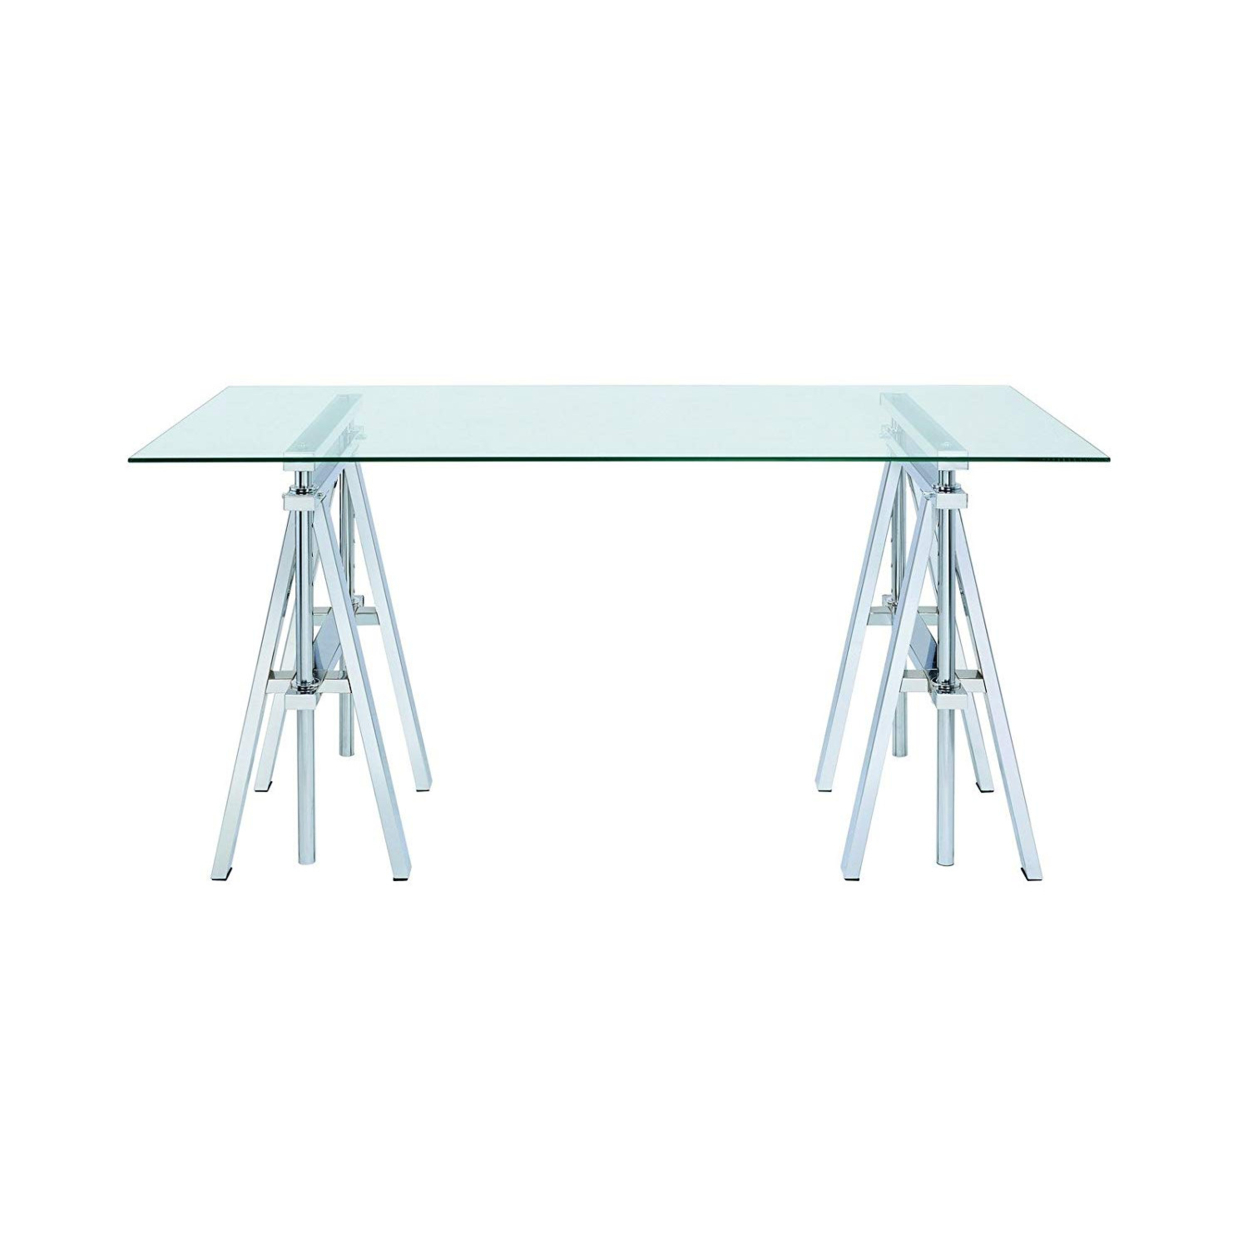 Adjustable Writing Desk With Sawhorse Legs, Clear And Silver- Saltoro Sherpi